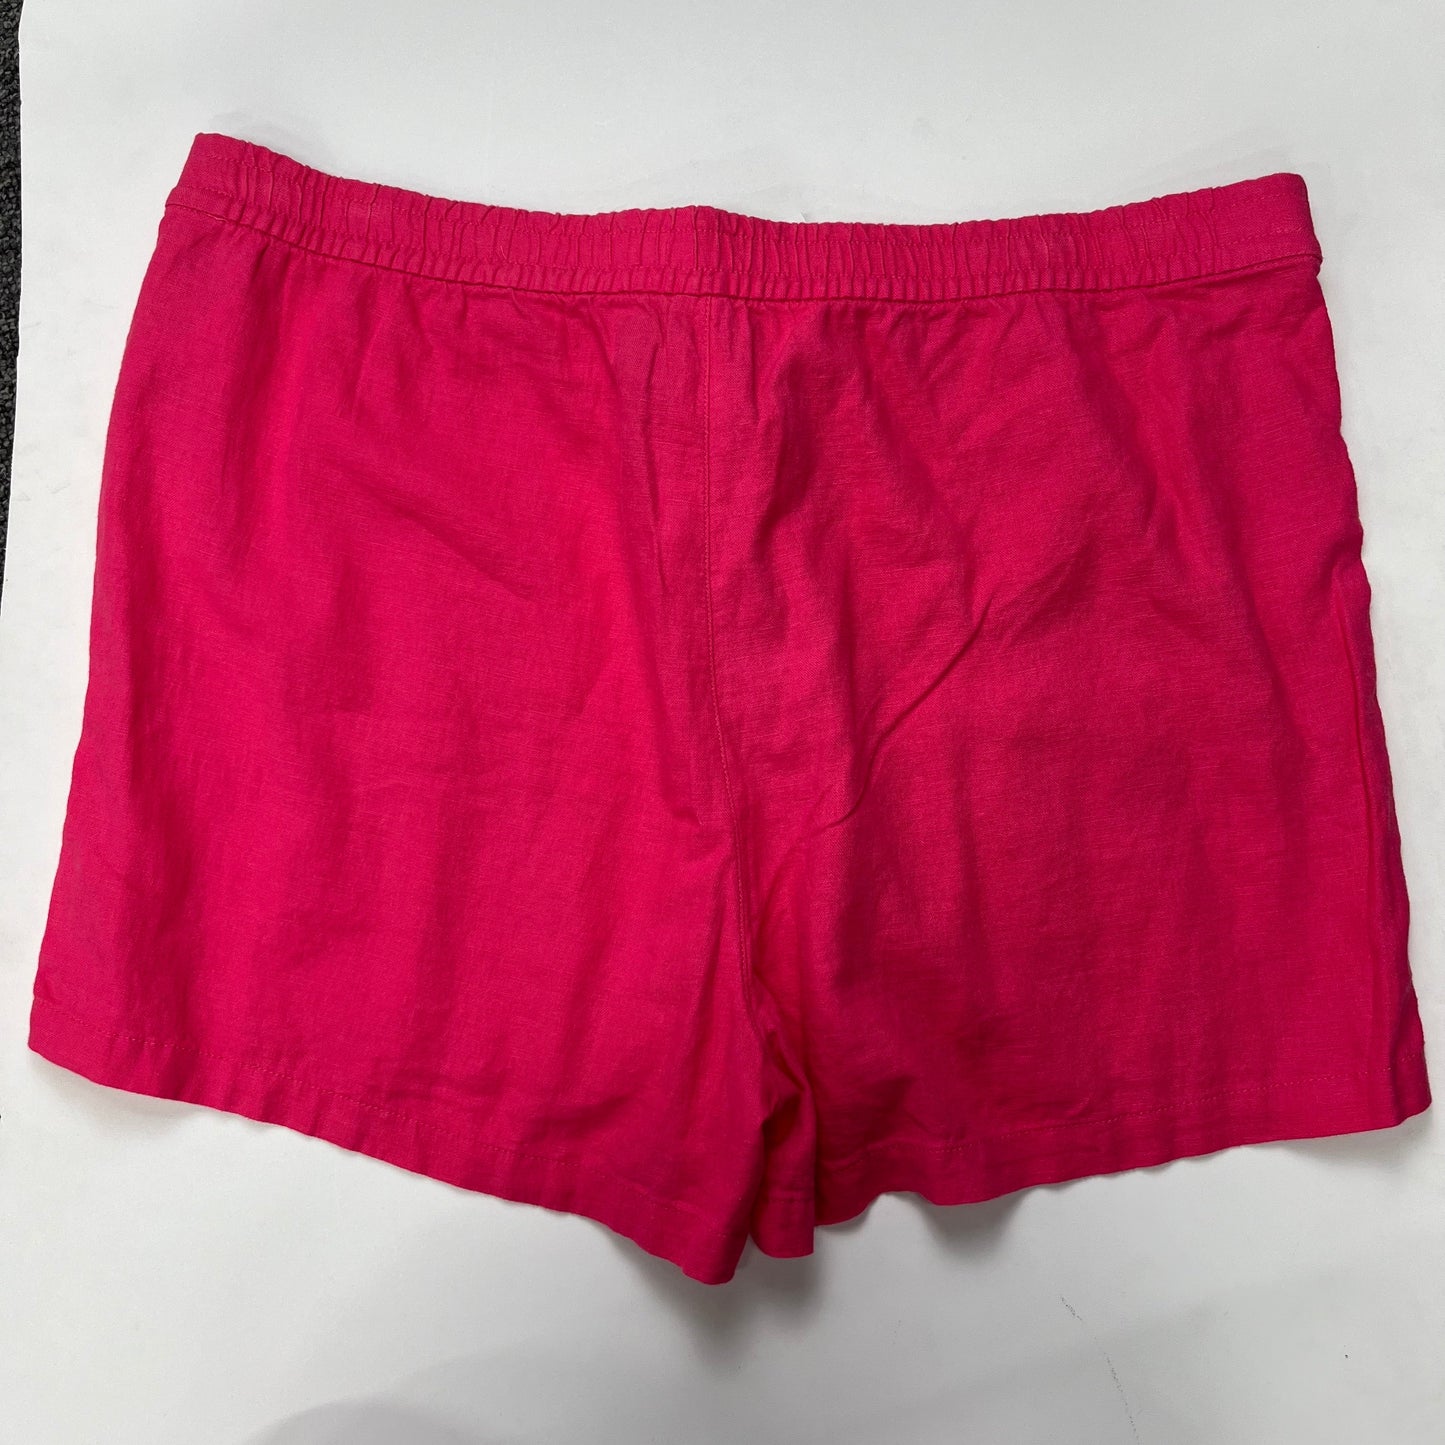 Shorts By J Crew NWT  Size: 22